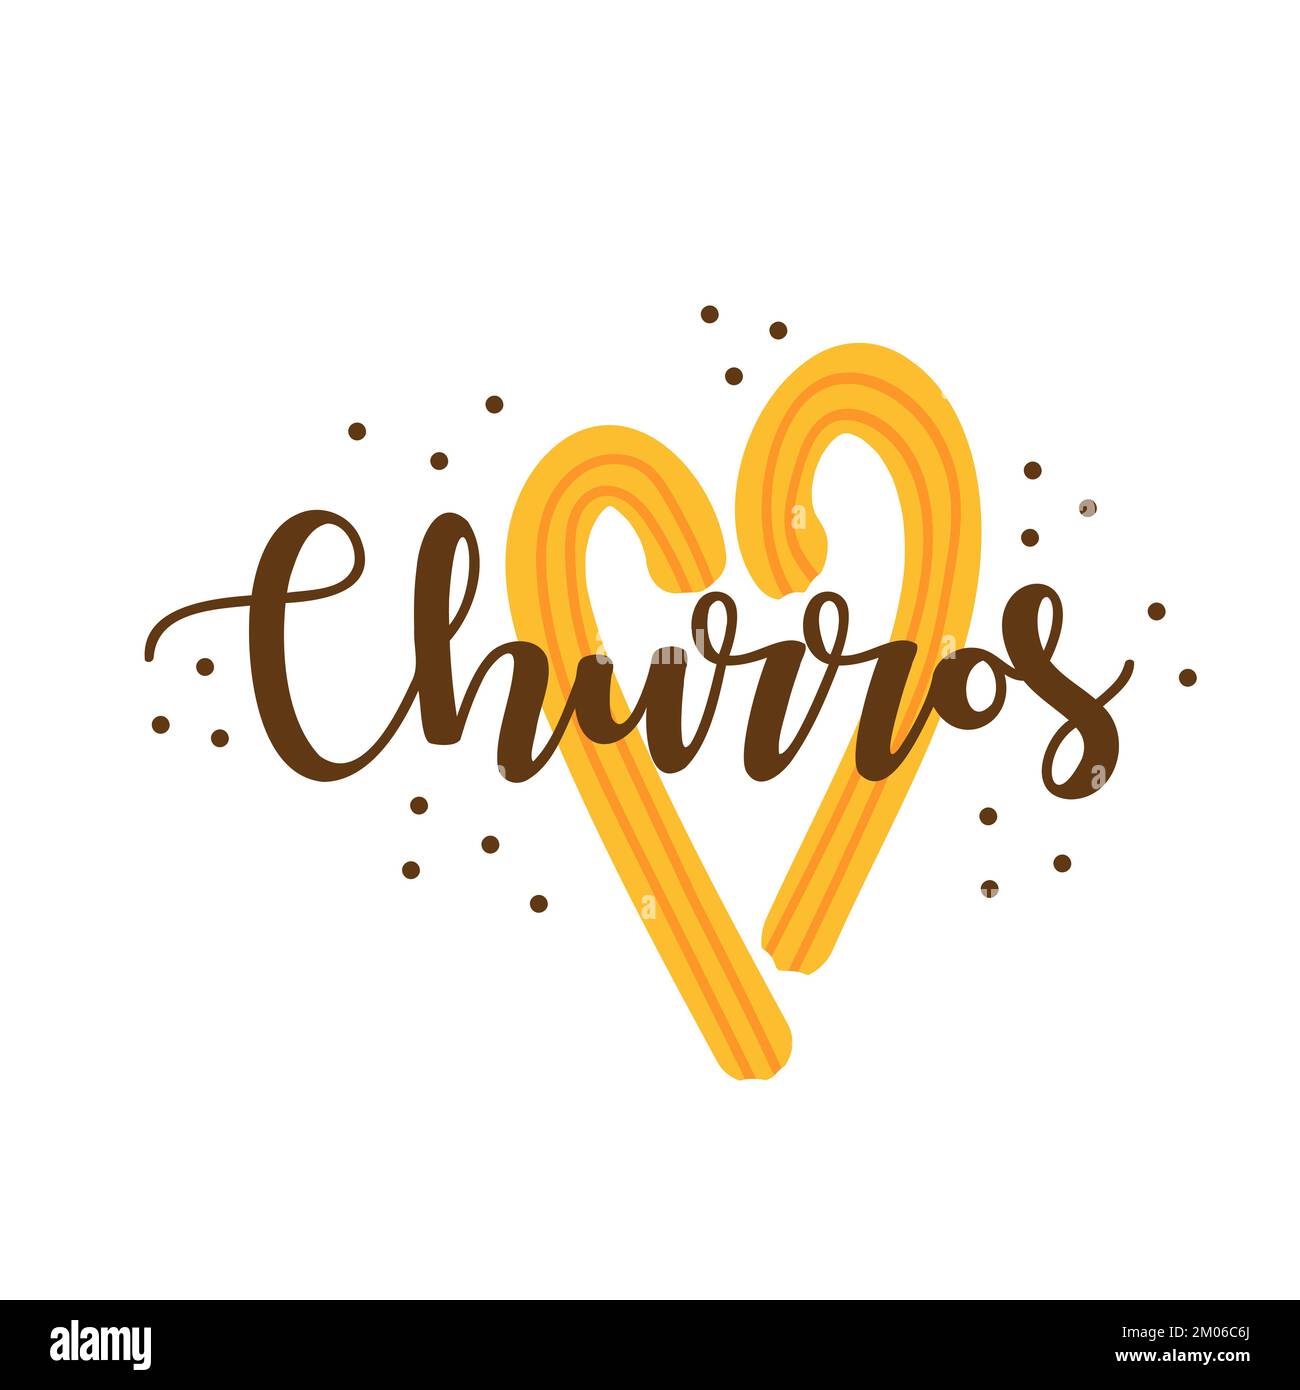 Churros. Hand drawn lettering with churros sticks in shape of heart. Vector illustration on white Stock Vector